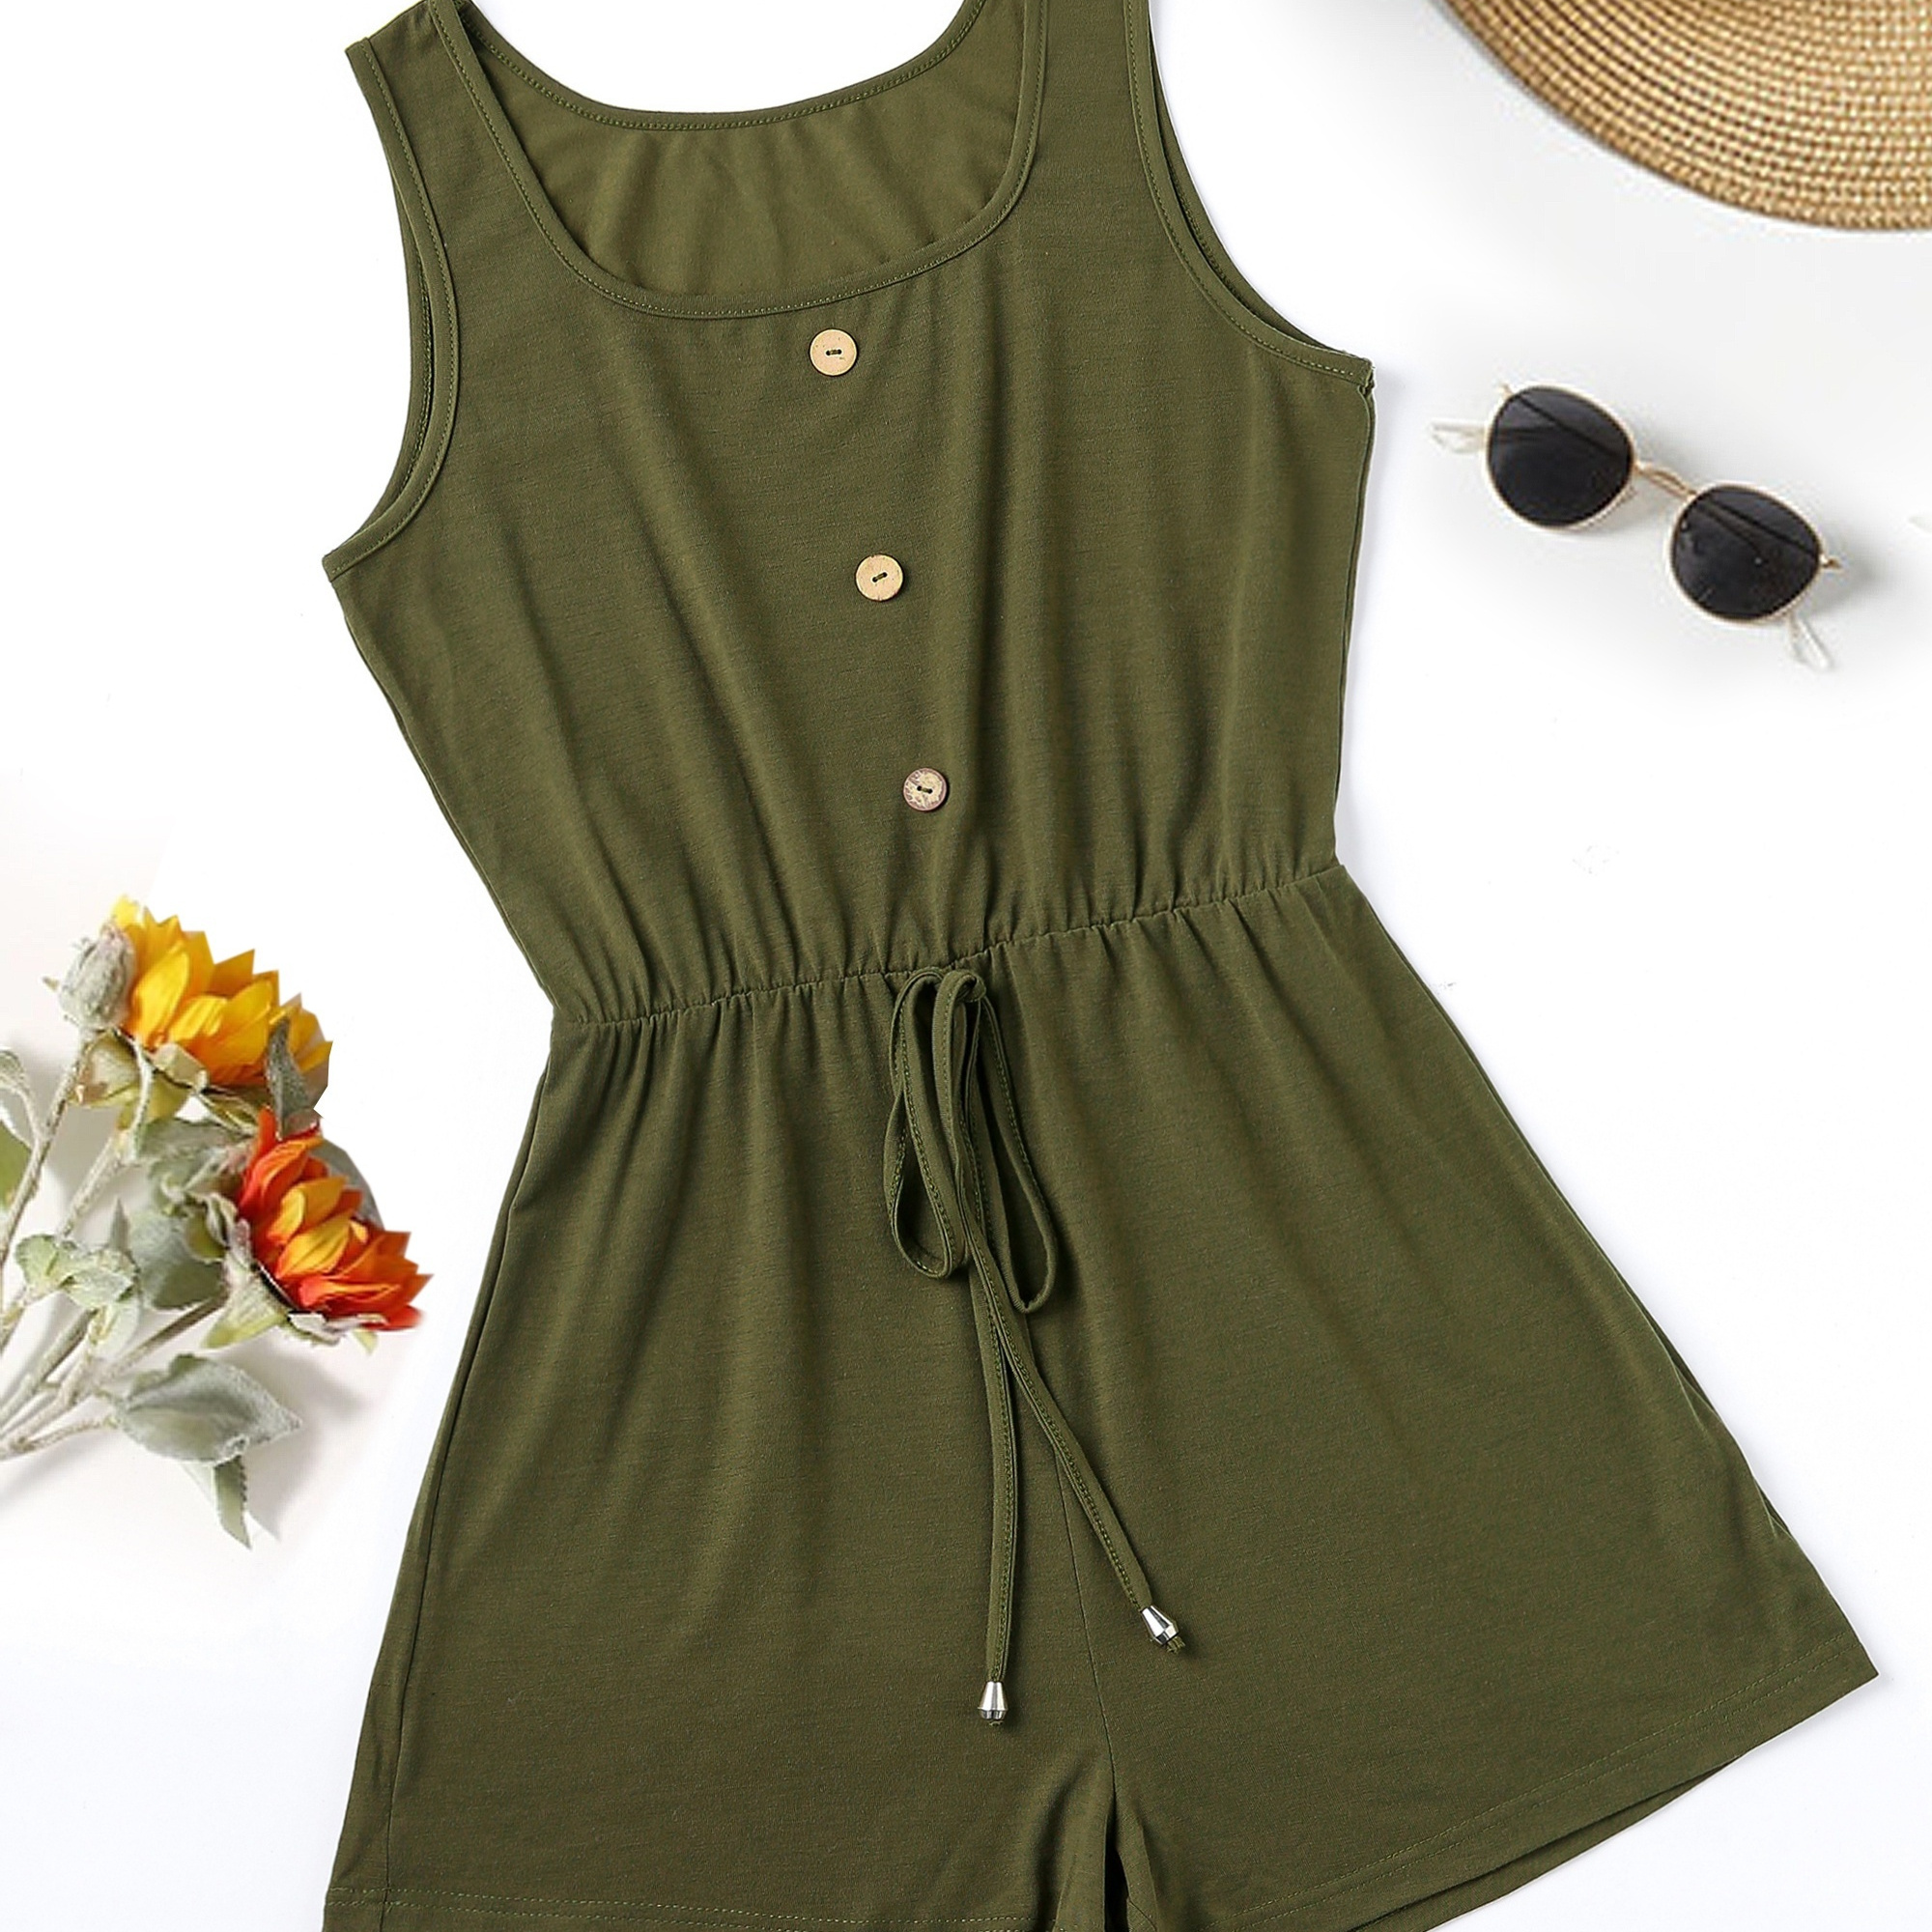 

Drawstring Waist Square Romper Jumpsuit, Casual Buttons Front Sleeveless Button Romper, Women's Clothing